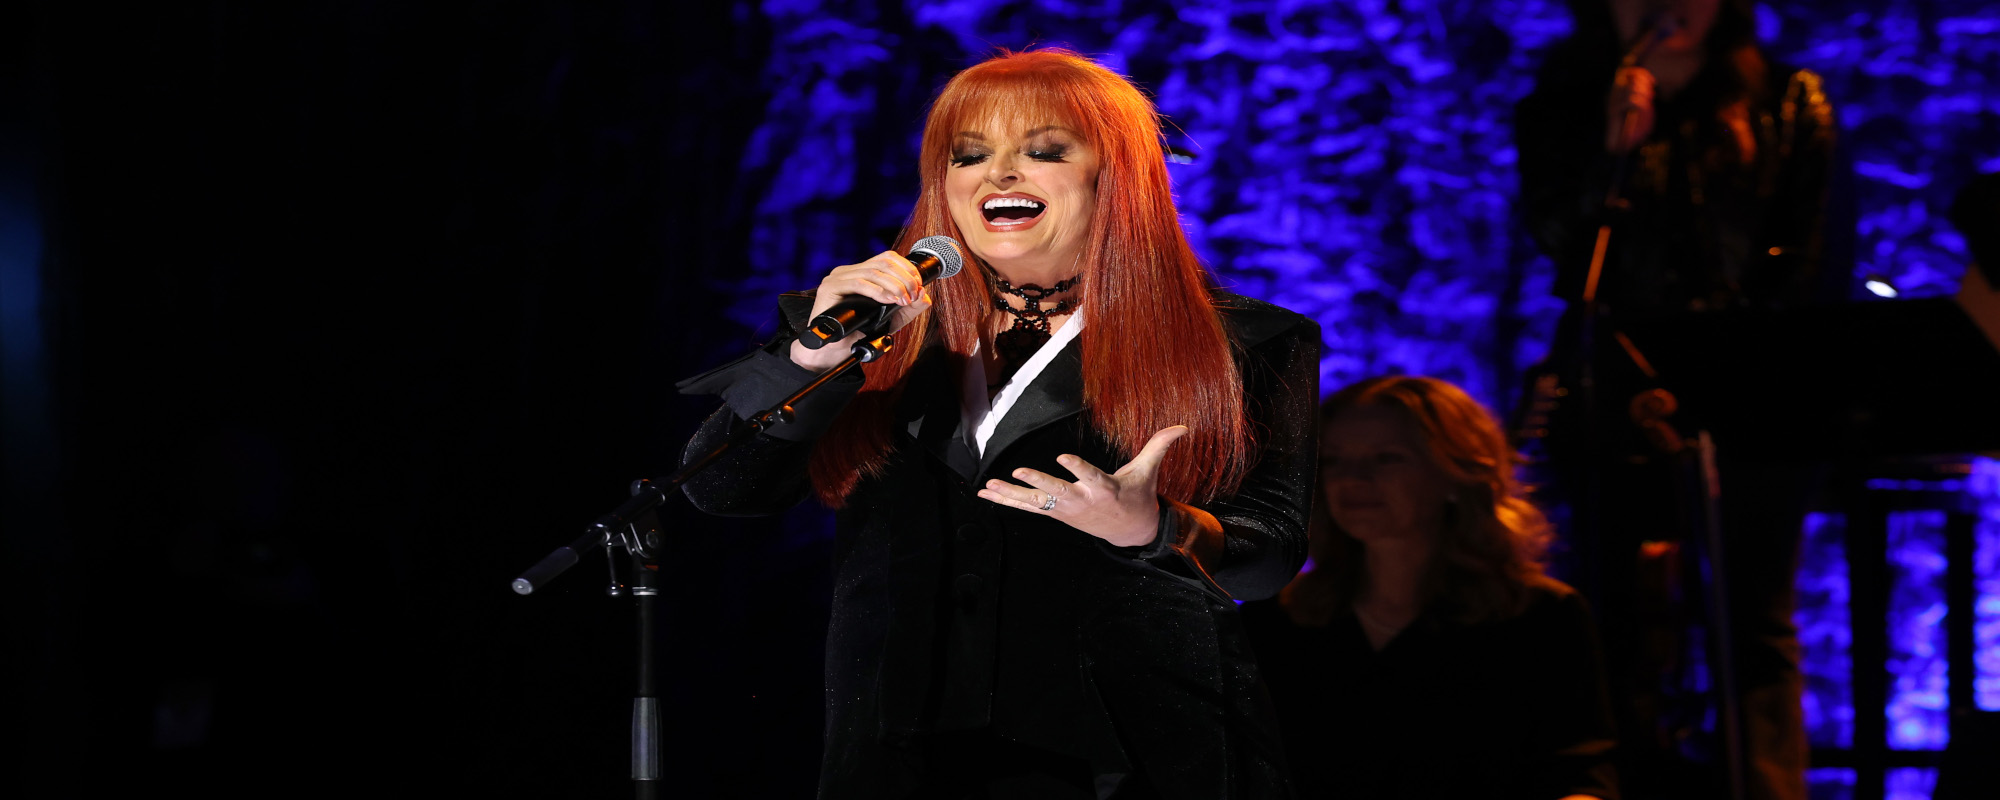 3 Songs You Didn’t Know Featured Wynonna Judd